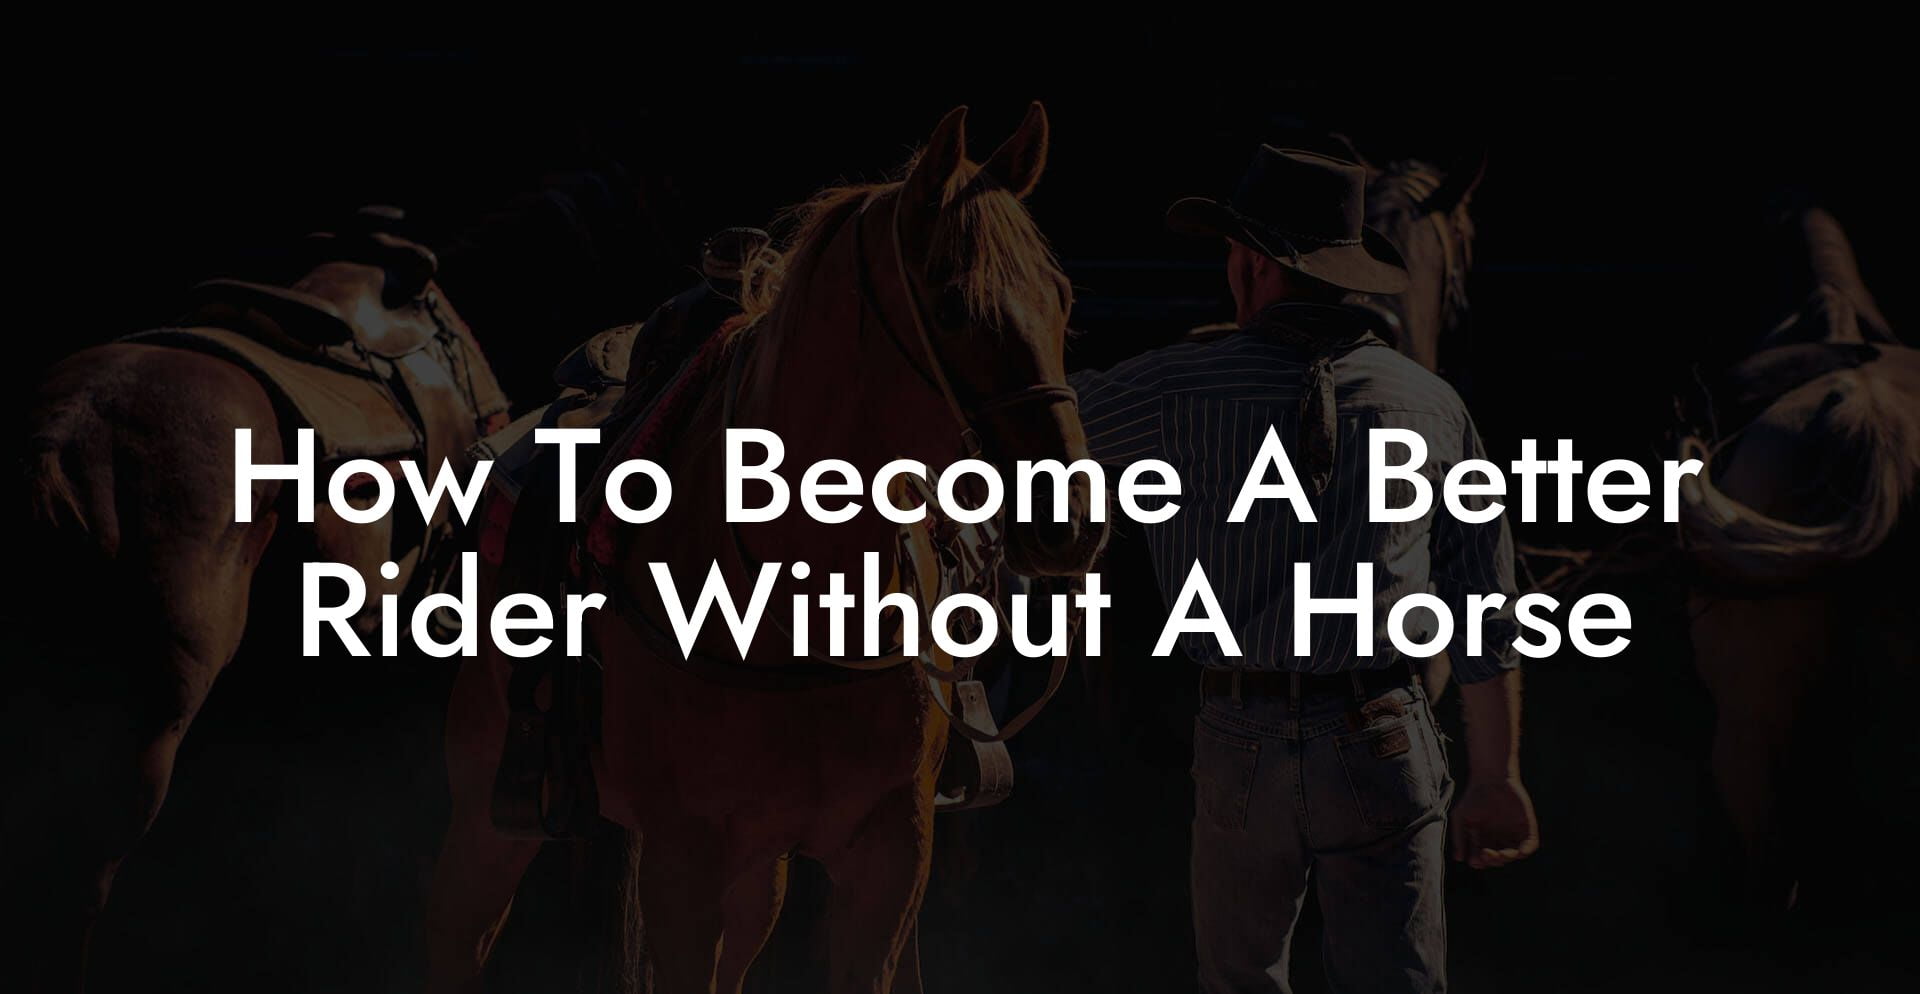 How To Become A Better Rider Without A Horse